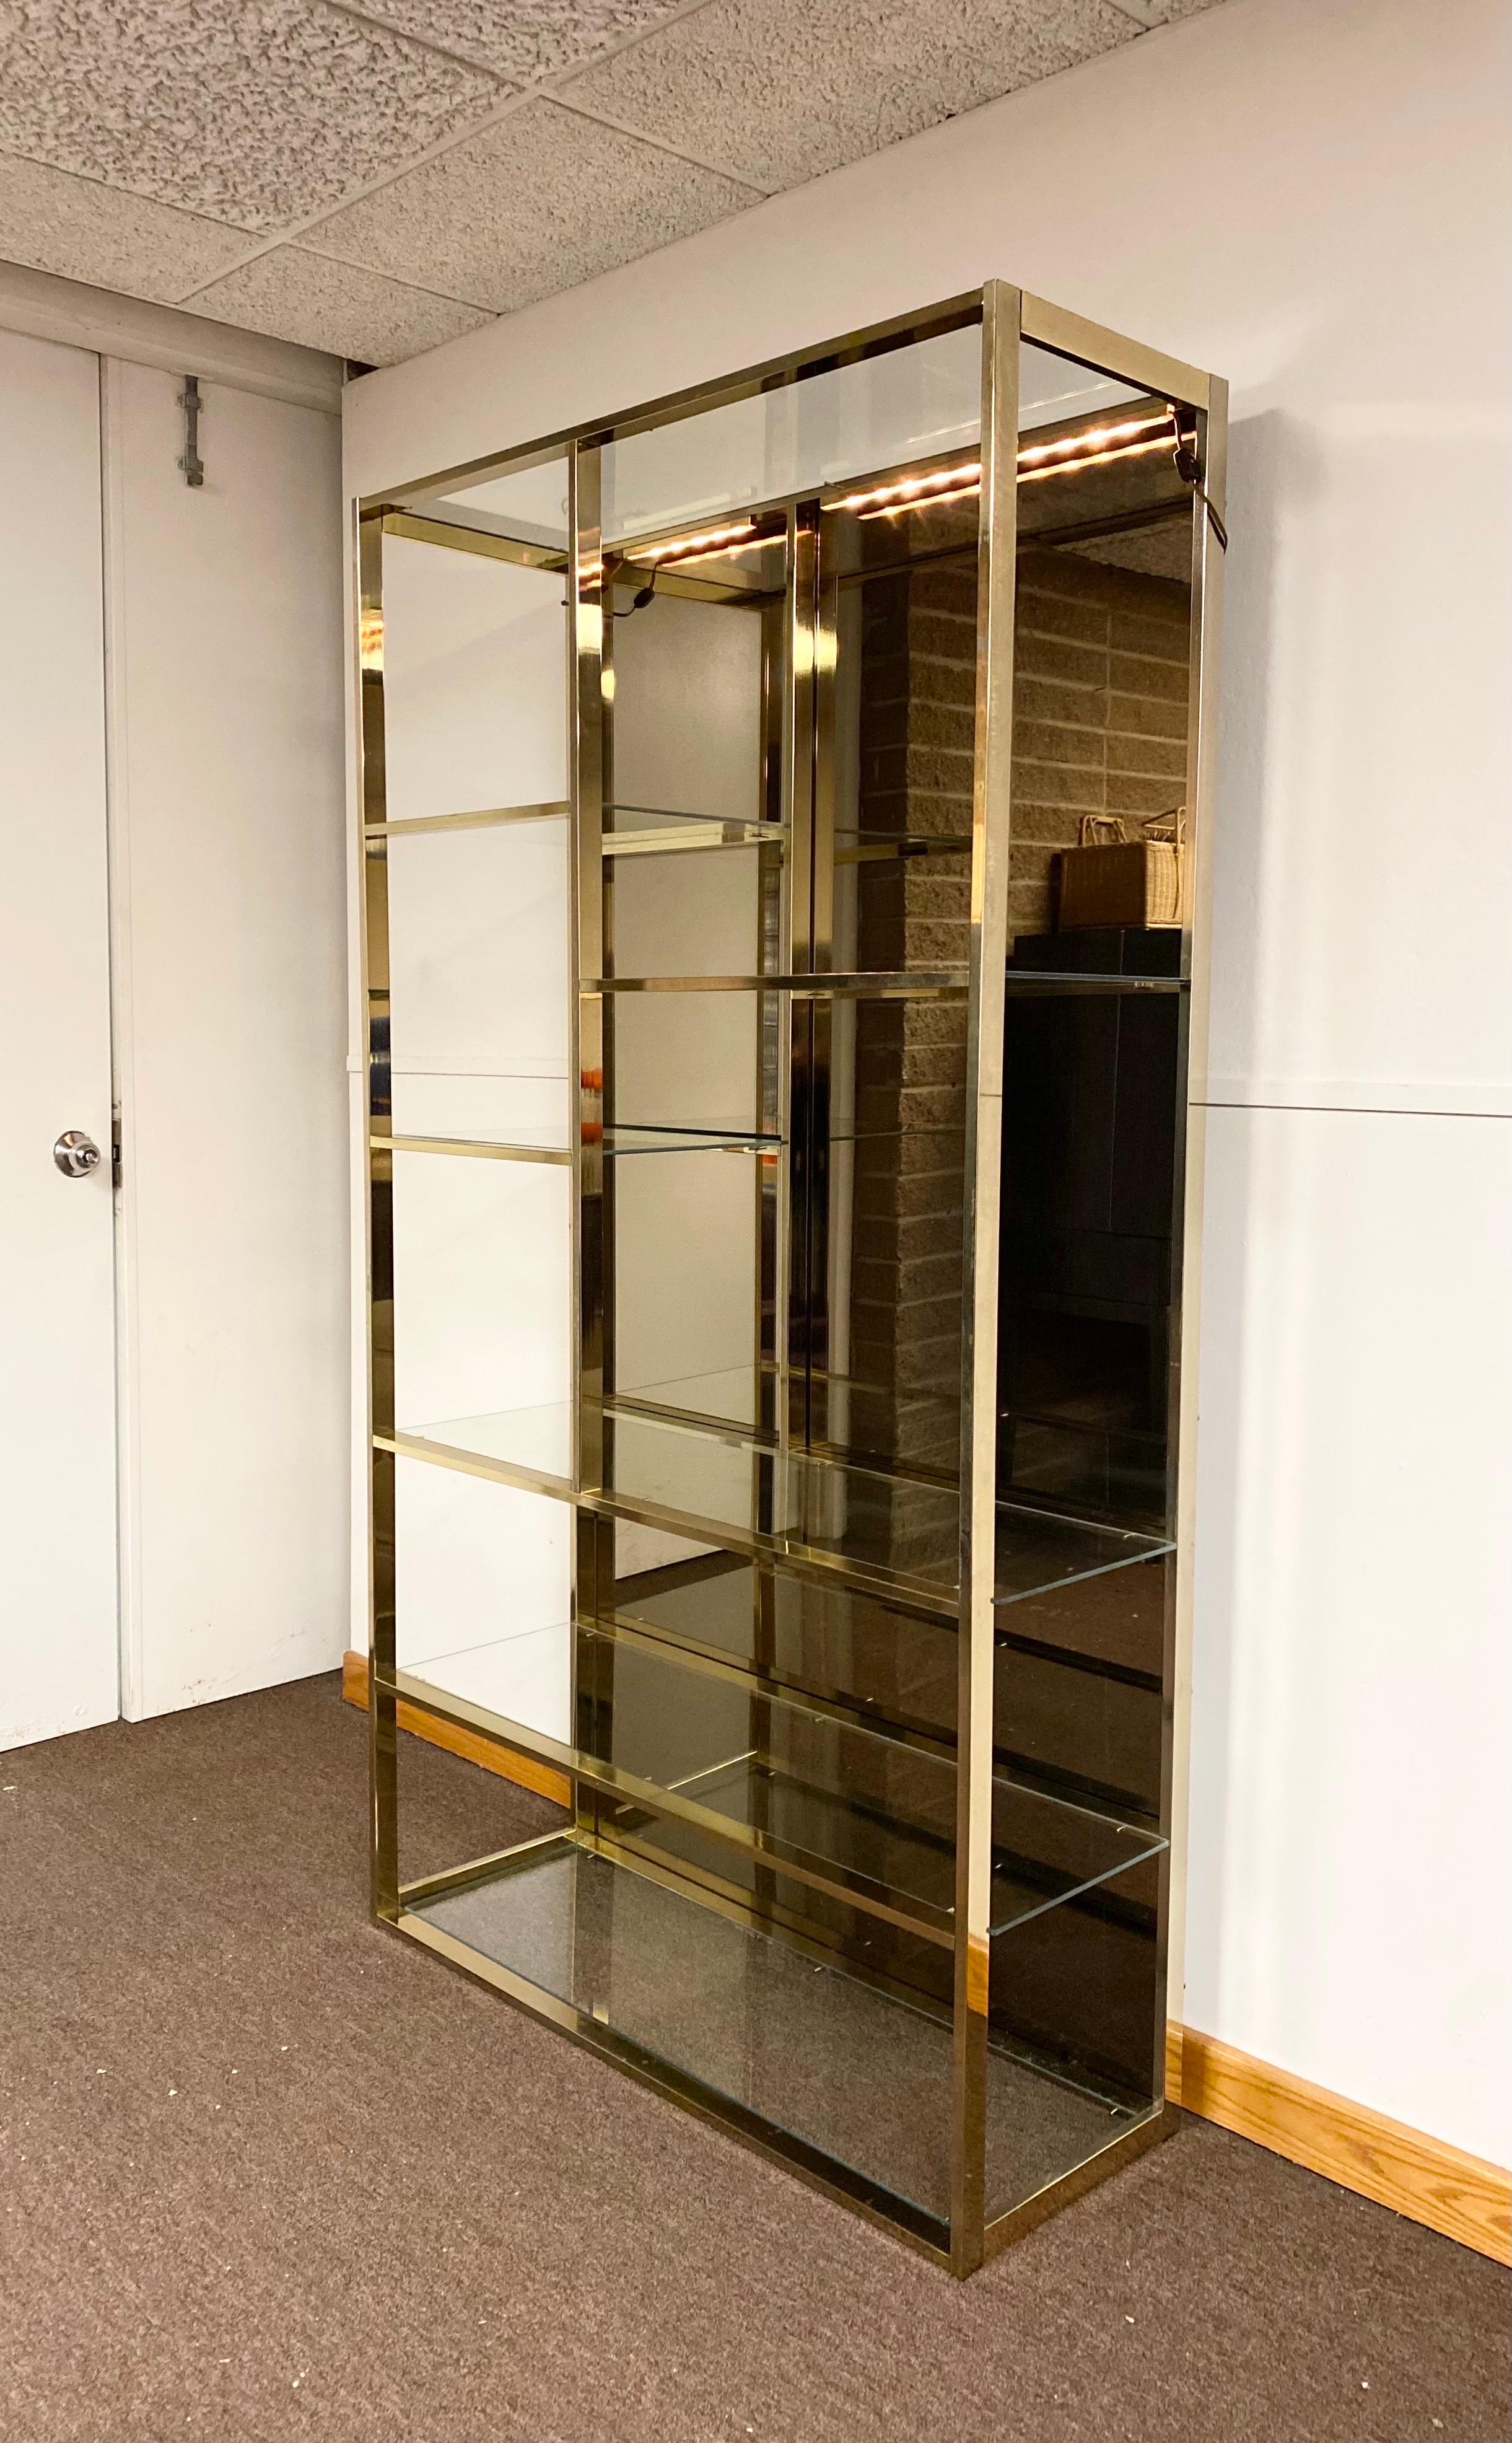 We are very pleased to offer a stunning etagere, circa the 1970s. Beautiful polished brass, a smoky mirrored interior back panel and clear glass come together to form a streamlined piece for storage and display. Perfect for any décor due to its